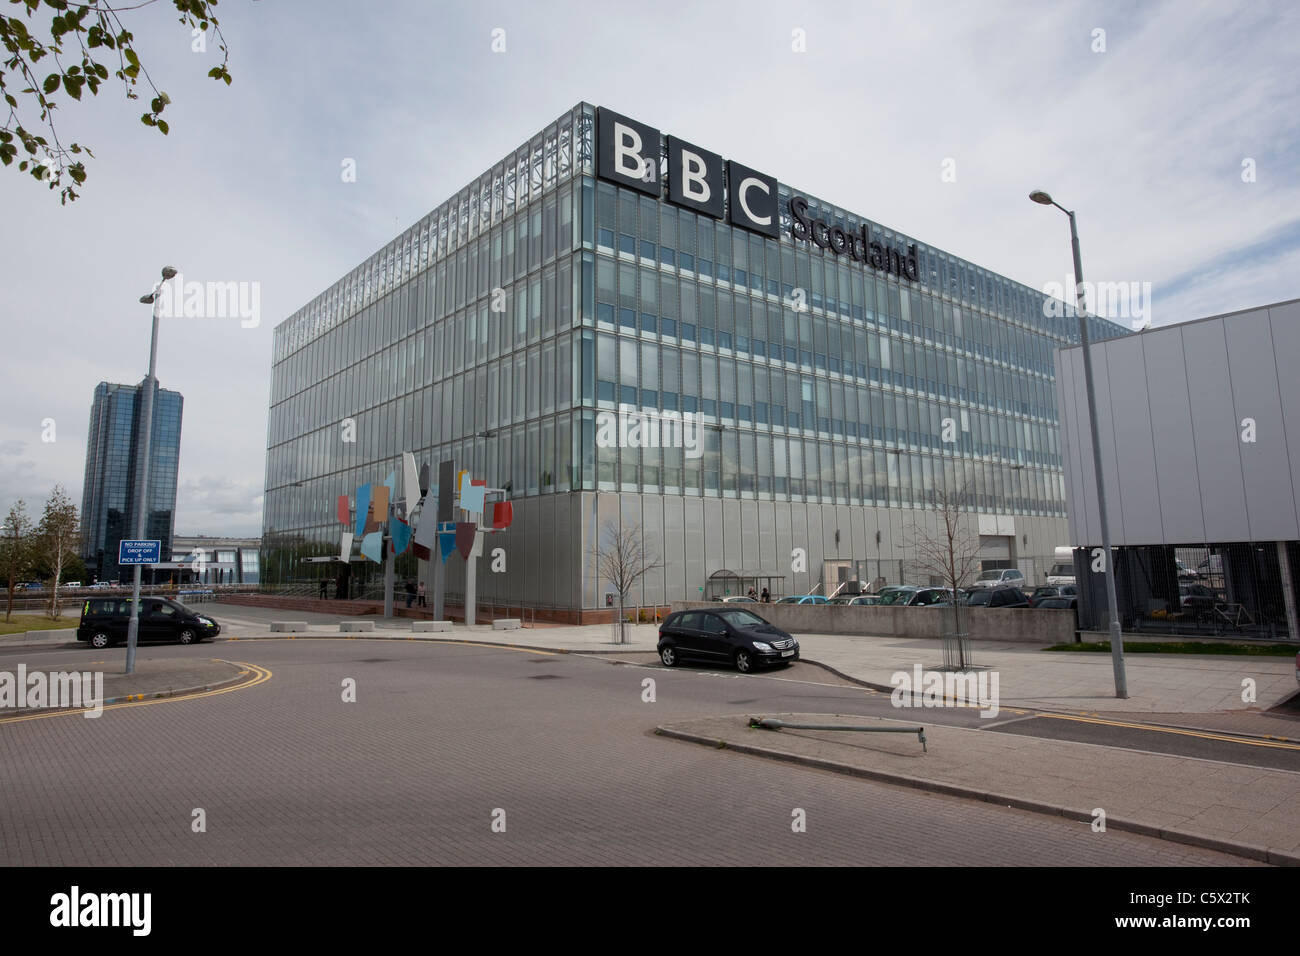 BBC Scotland on the banks of the River Clyde, Glasgow. Photo:Jeff Gilbert Stock Photo